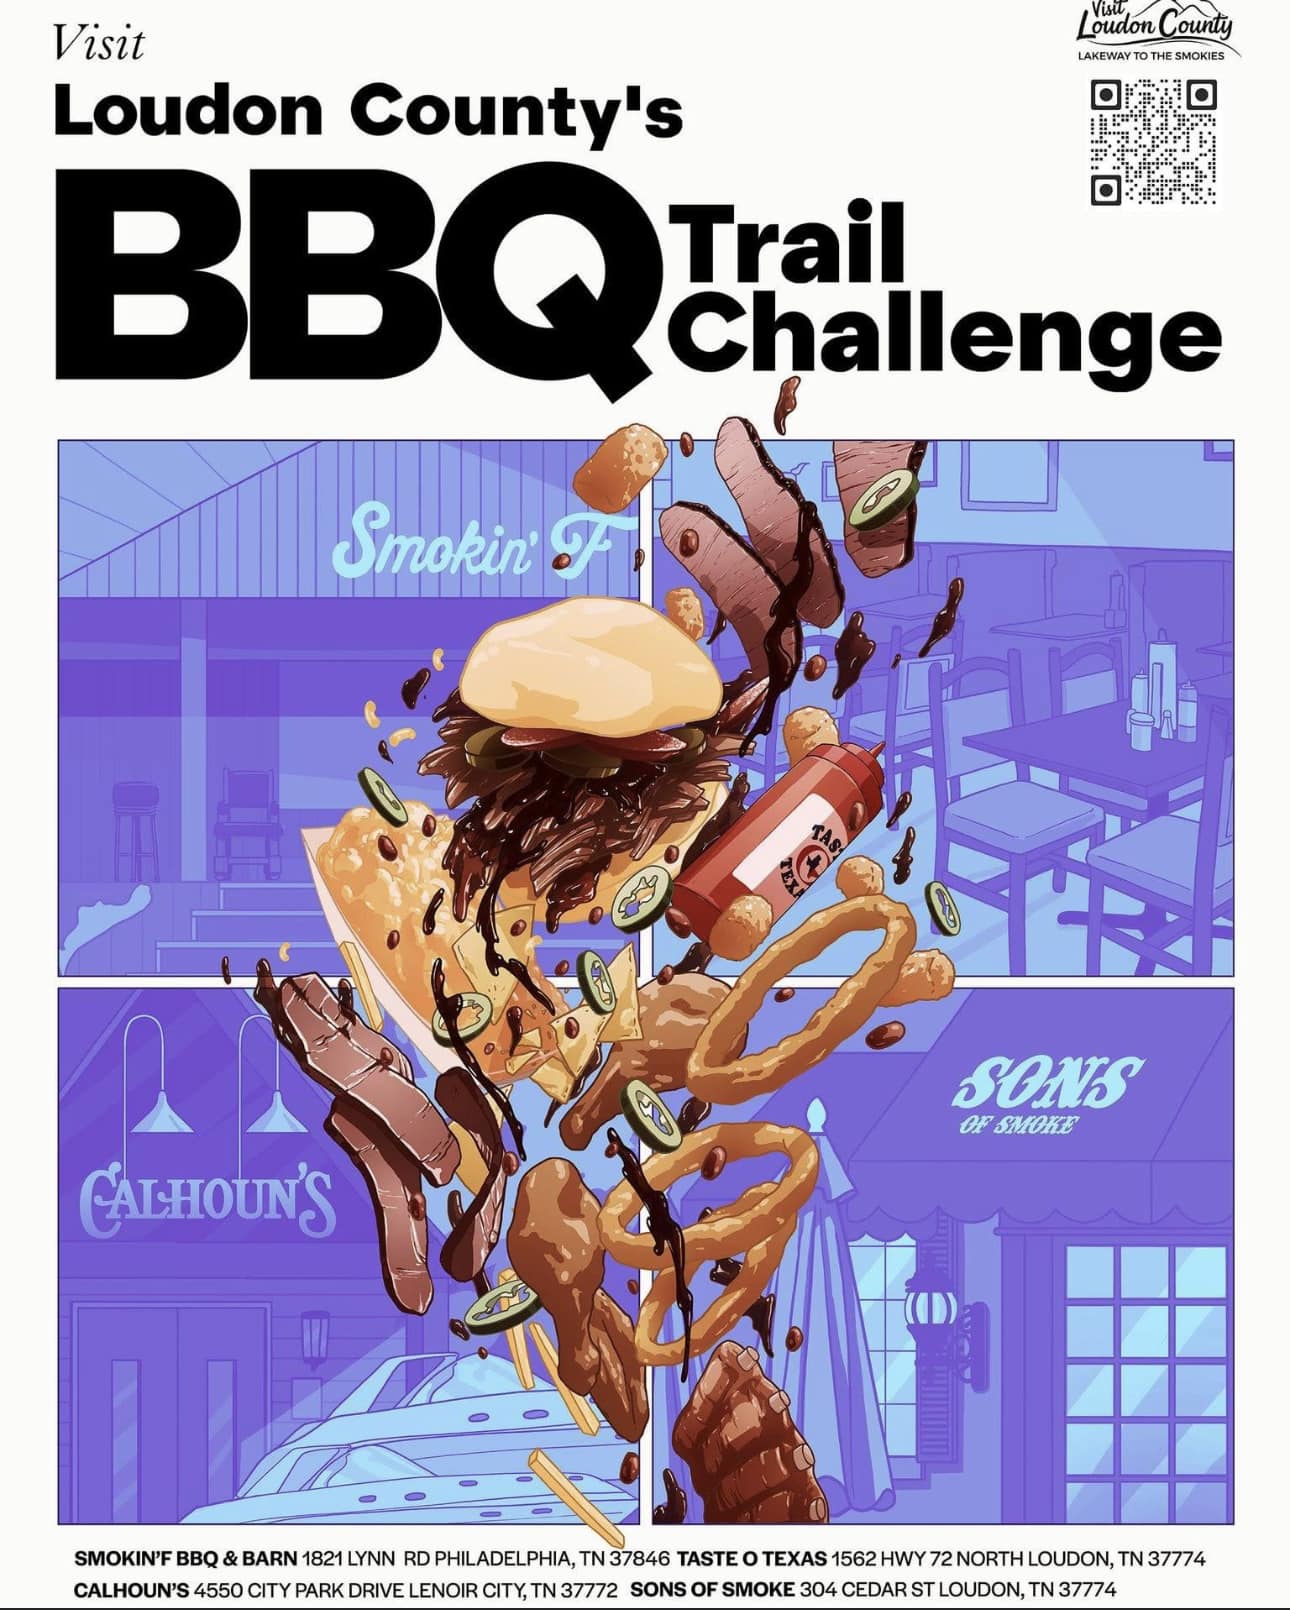 London county bbq trail challenge poster.